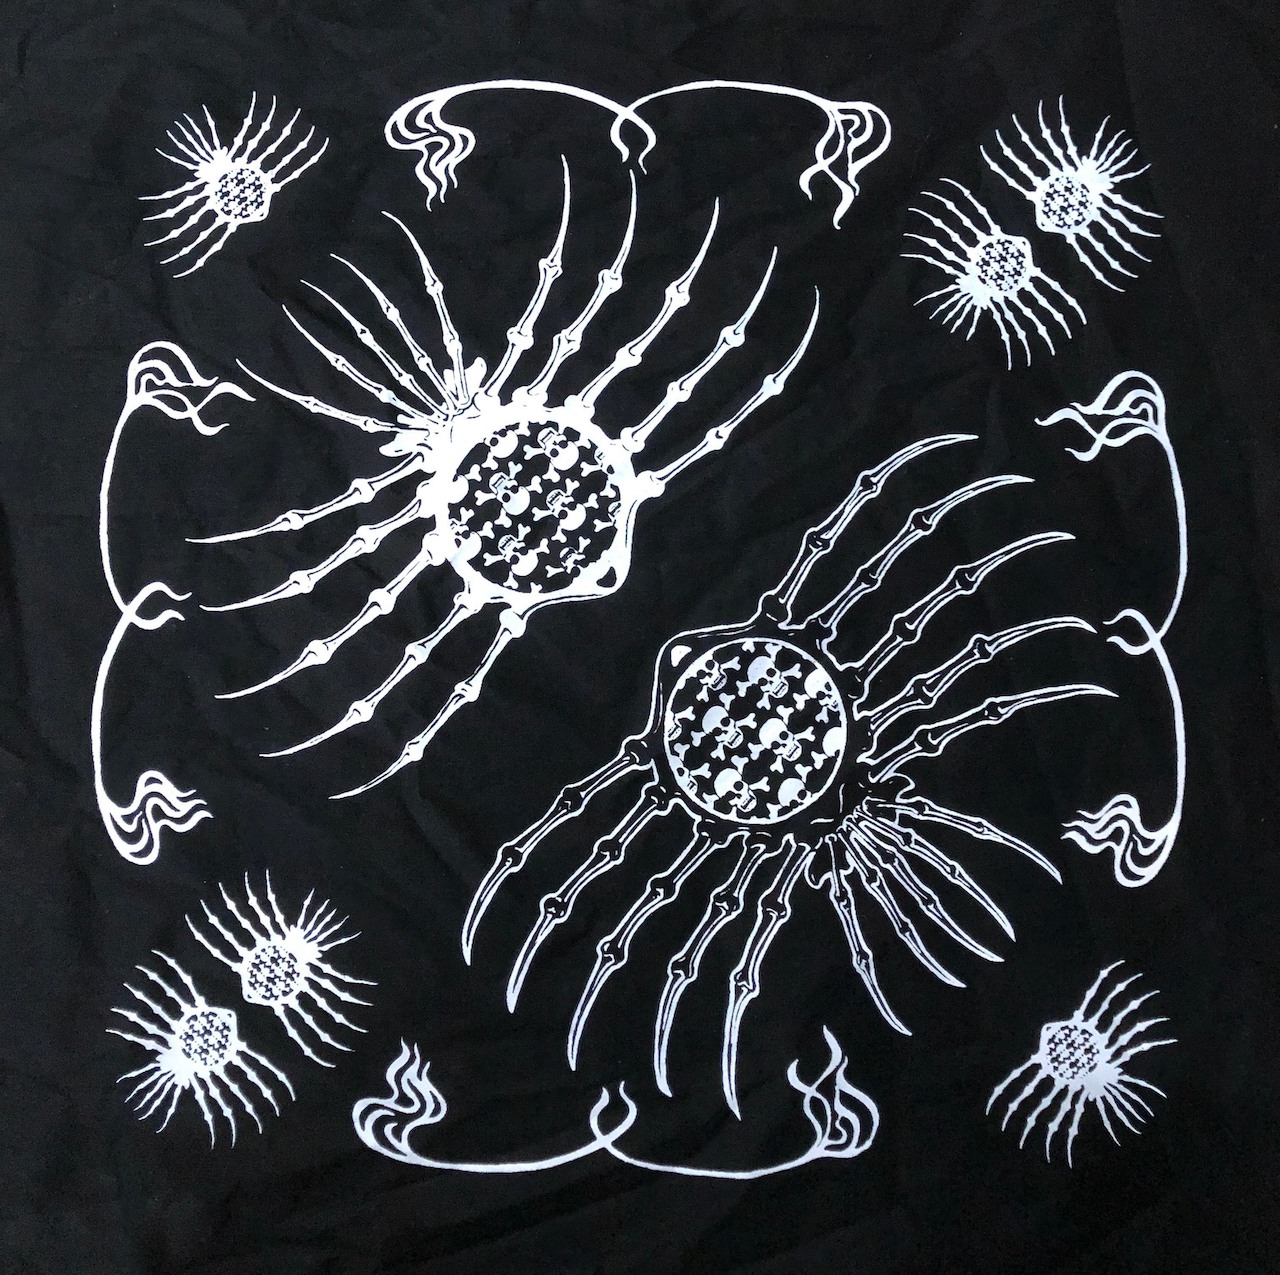 A screen print on black fabric of skulls inside spider or insect like outlines.